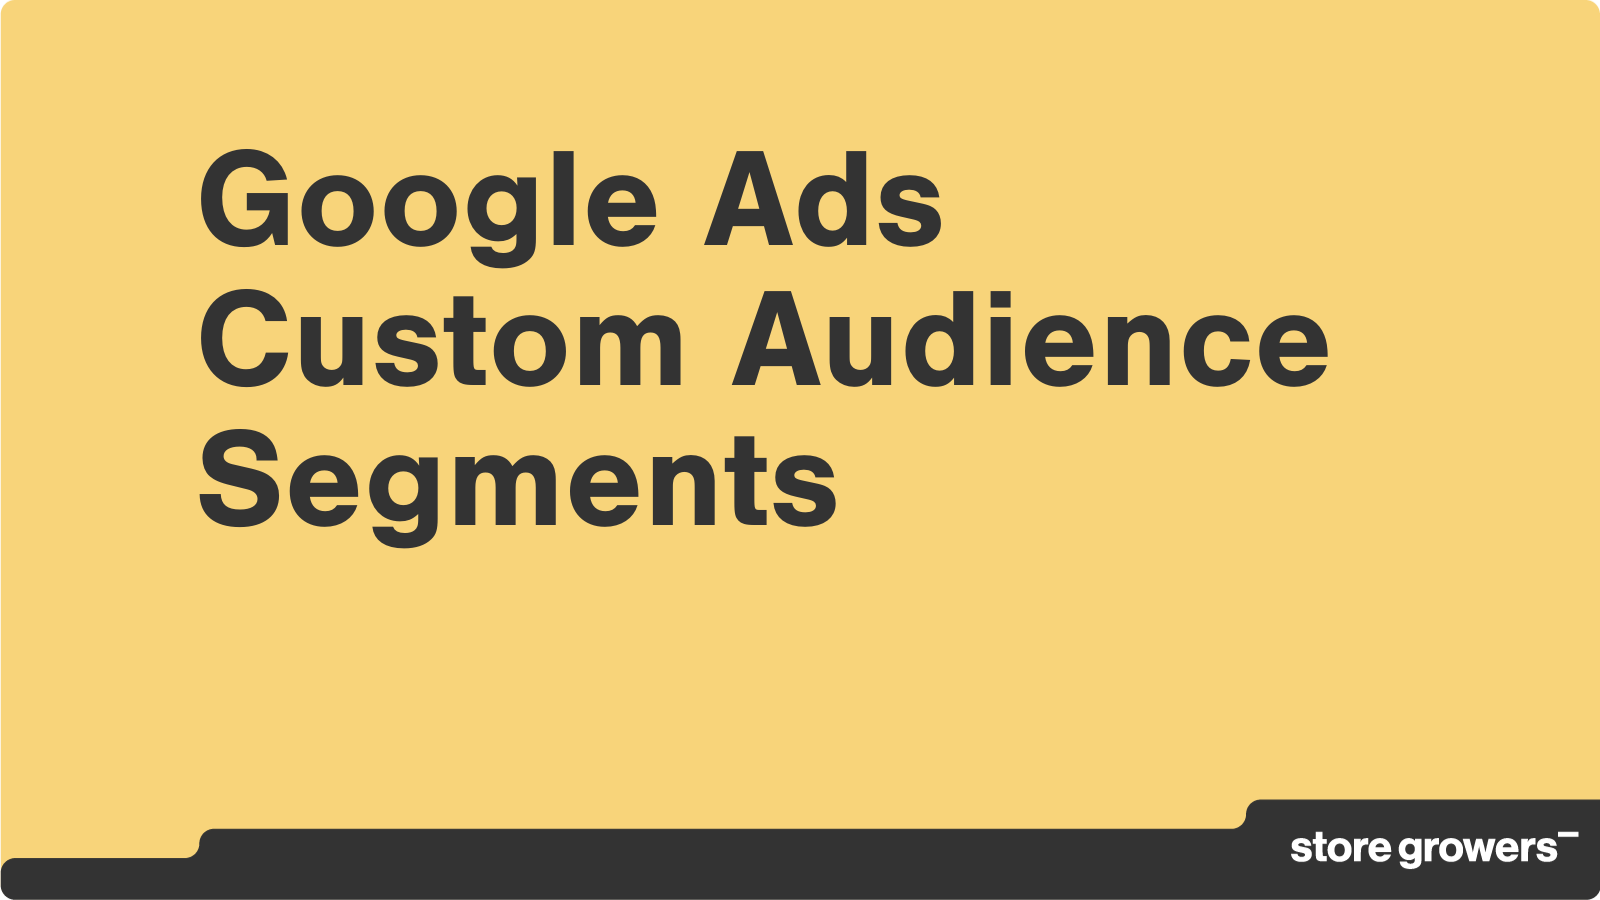 Google Ads: Highly customizable ads that reach your audience